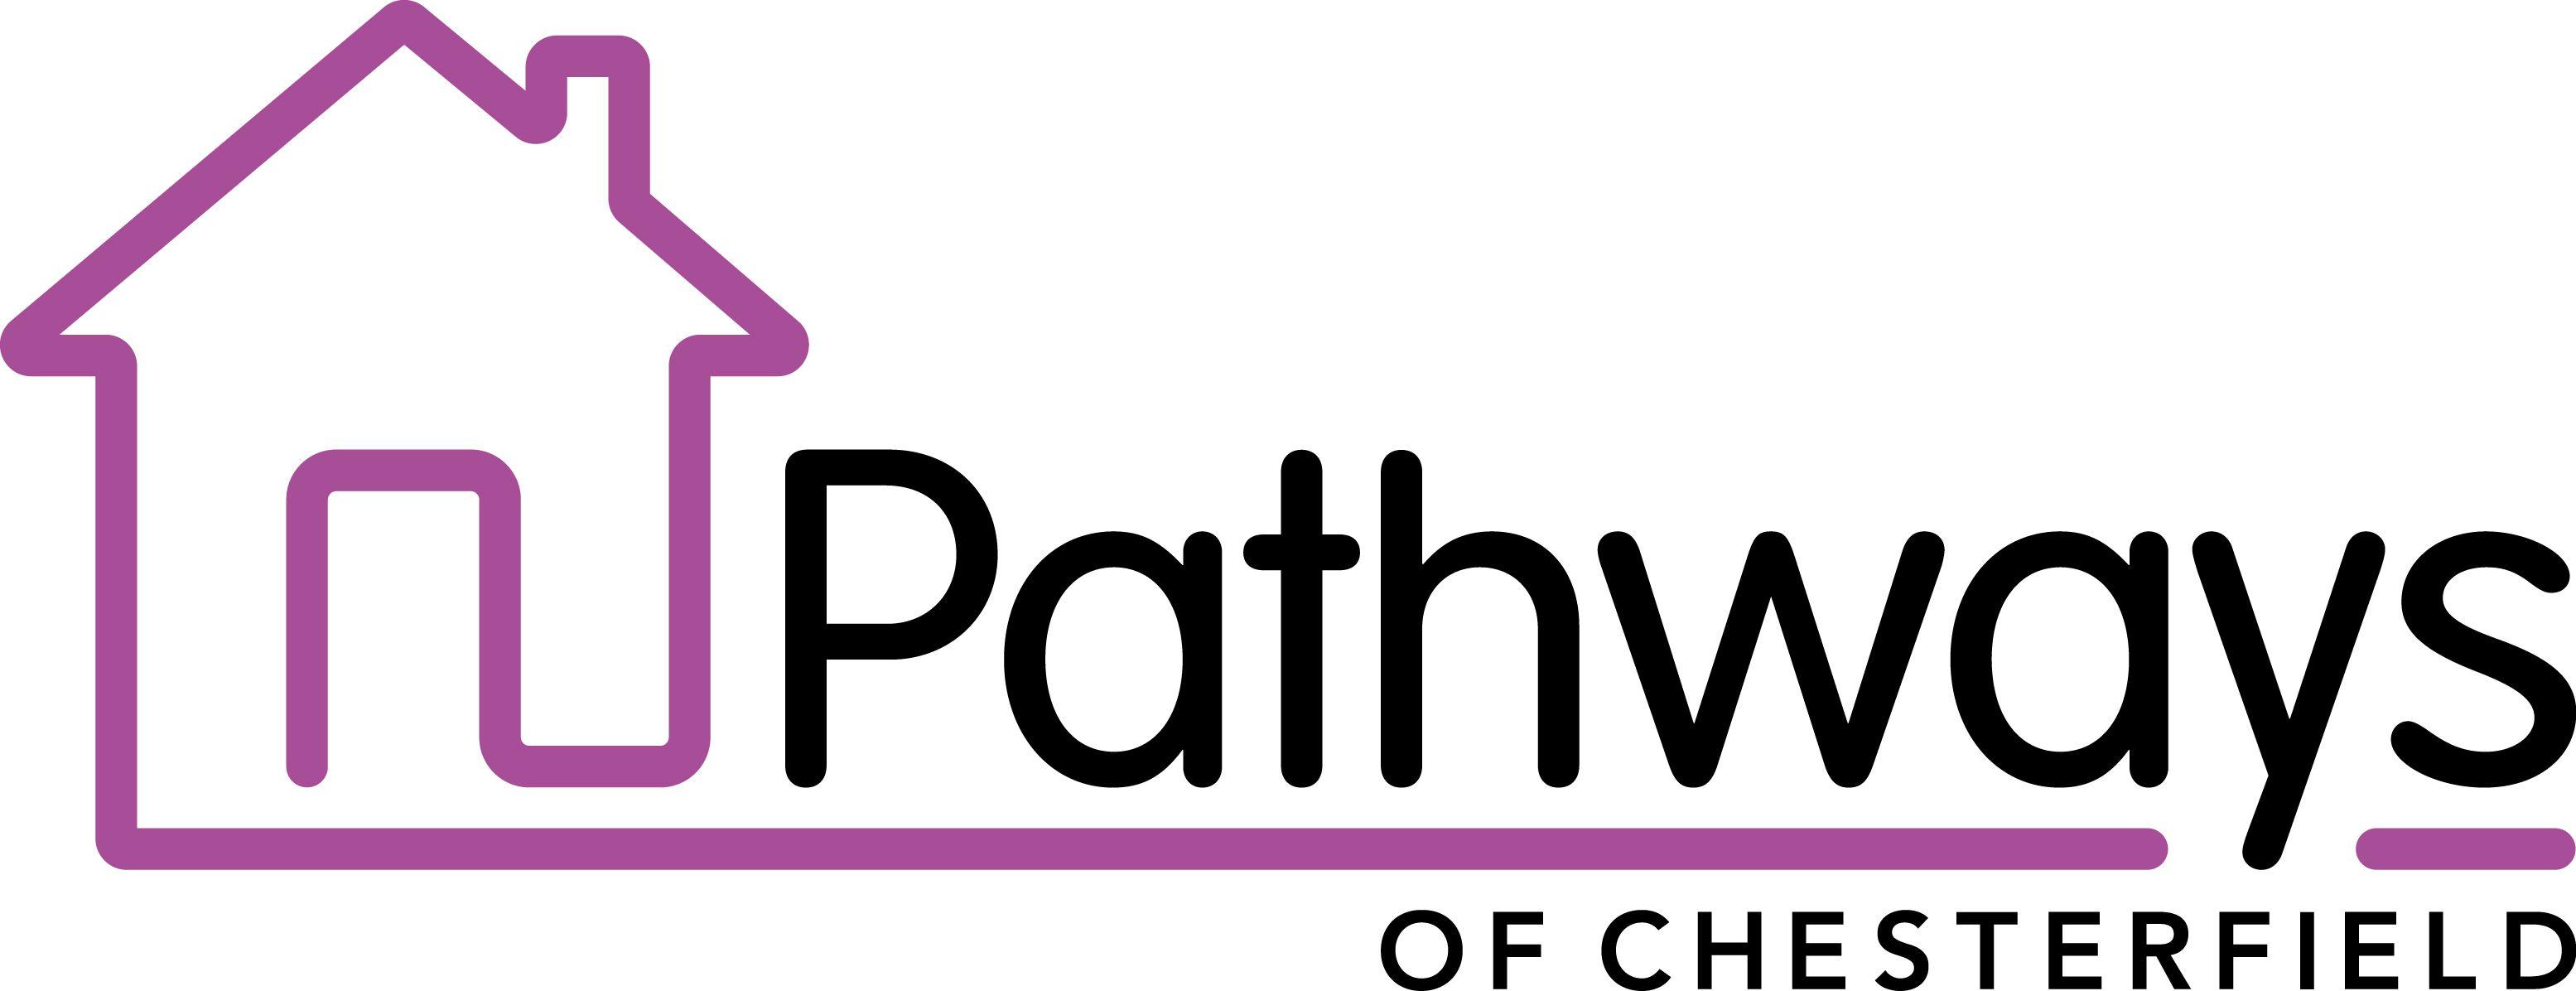 Chesterfield Logo - Home | Pathways of Chesterfield